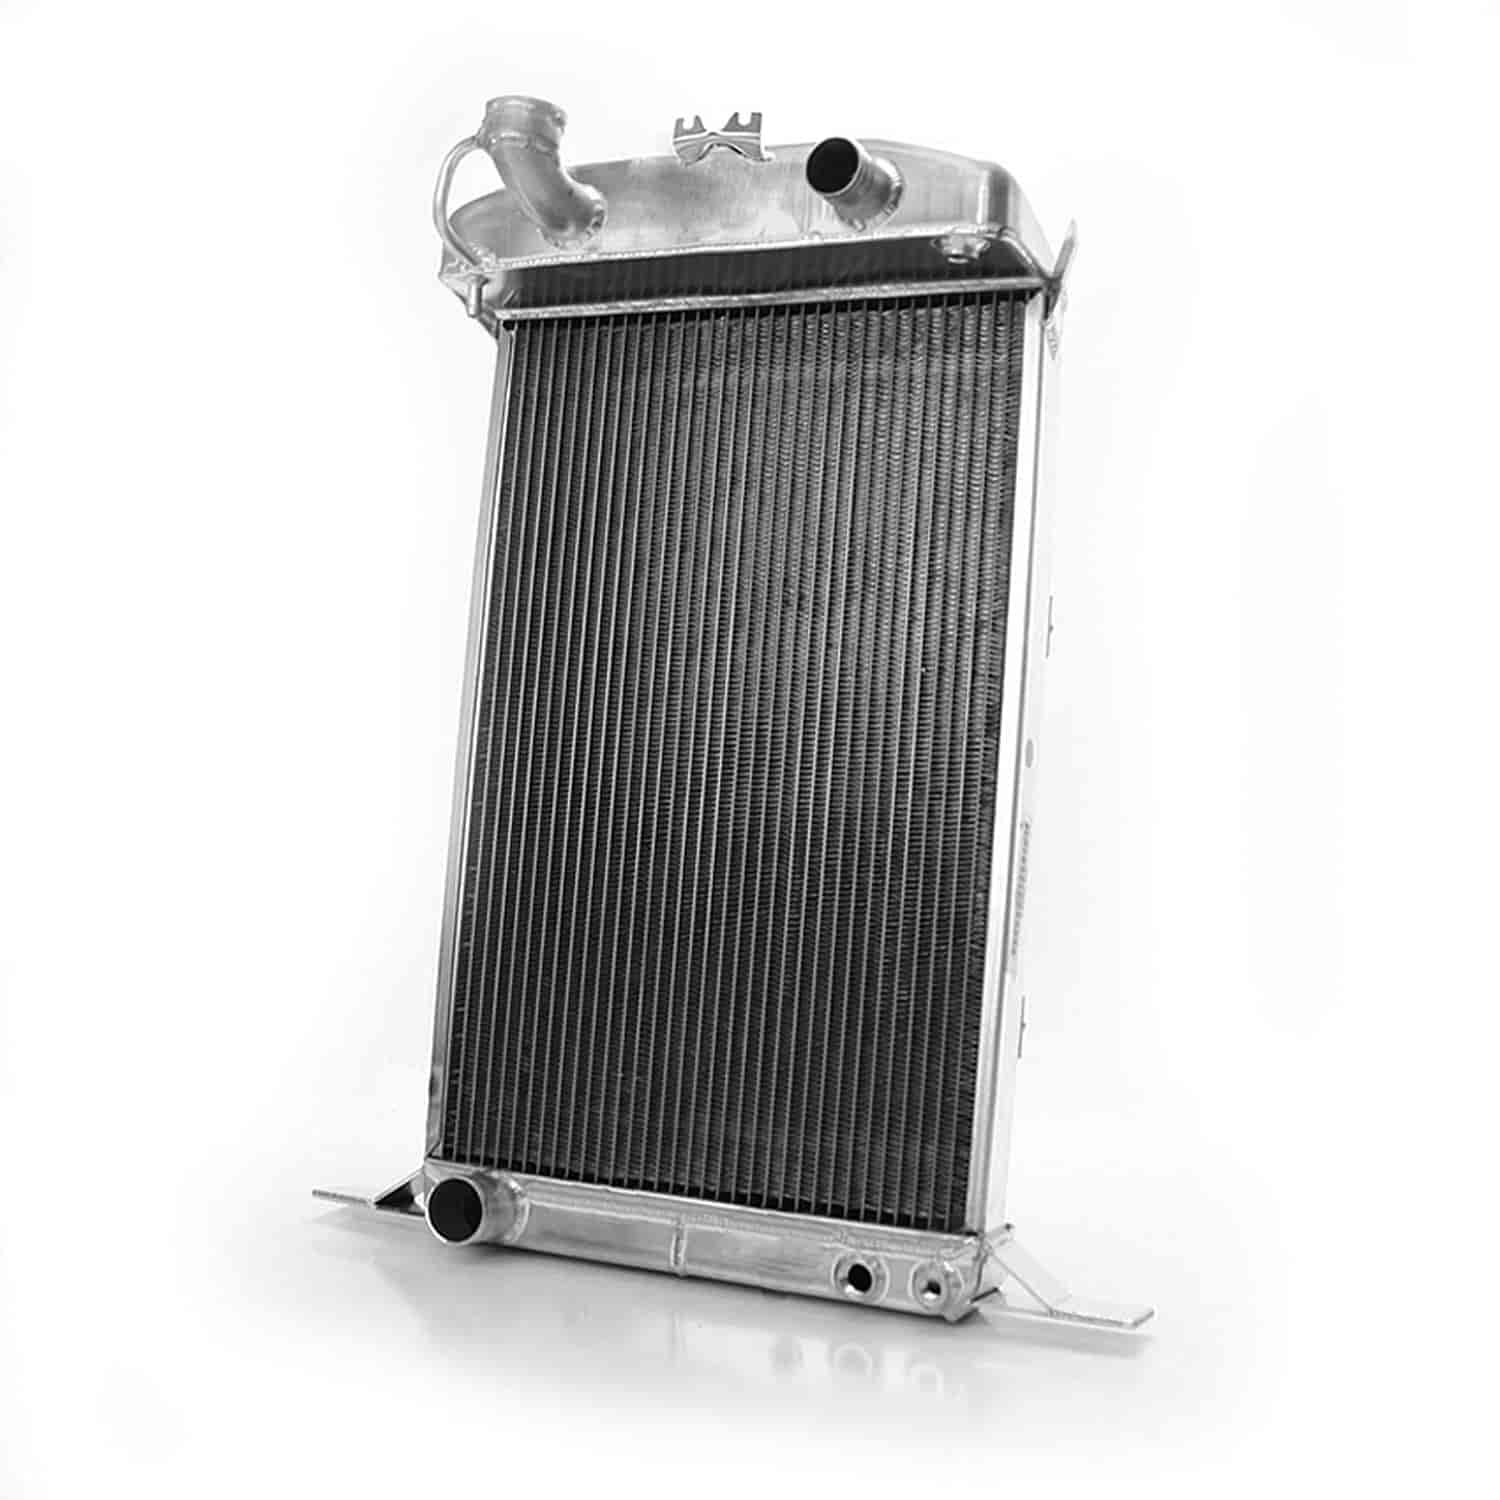 ExactFit Radiator for 1937-1938 Ford with Late Ford Small Block & Big Block